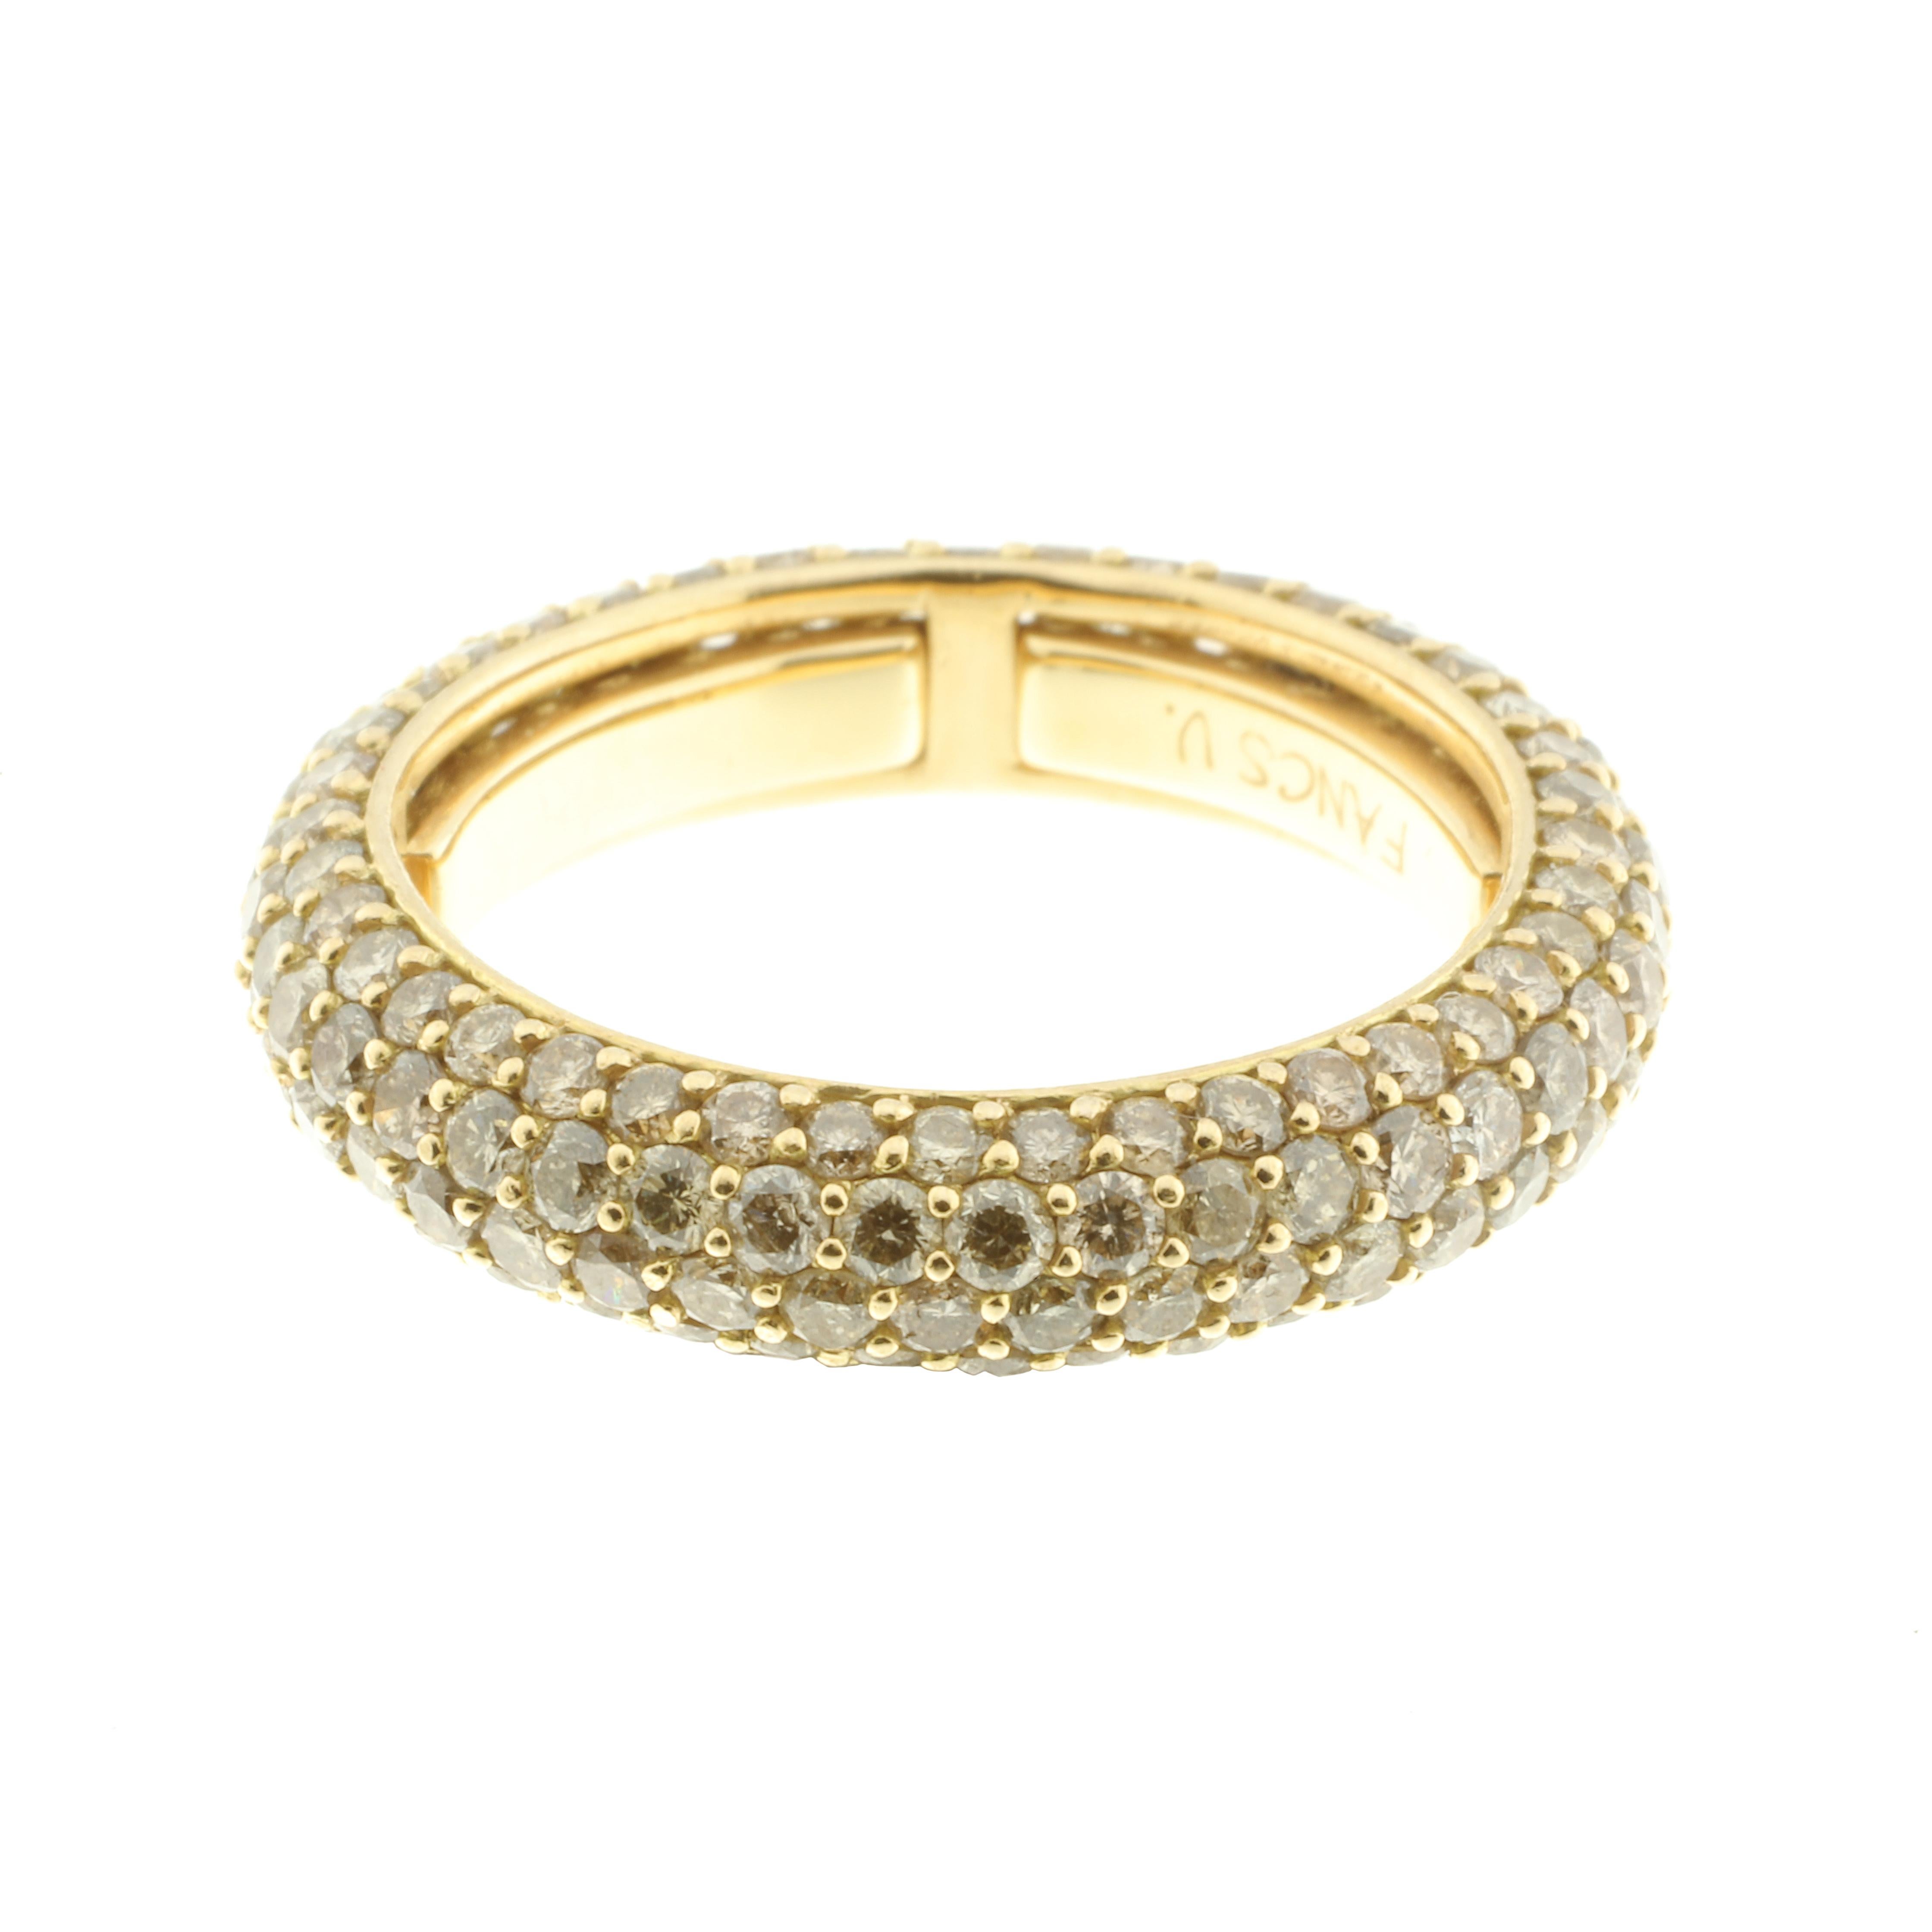 An 18-karat yellow gold and 3.08-carat brown diamond ( a beautiful champagne colour) eternity ring. 

A series of sprung sizers inside the band comfortably fit the ring to your finger. The ring looks beautiful alone or as the crown jewel stacked